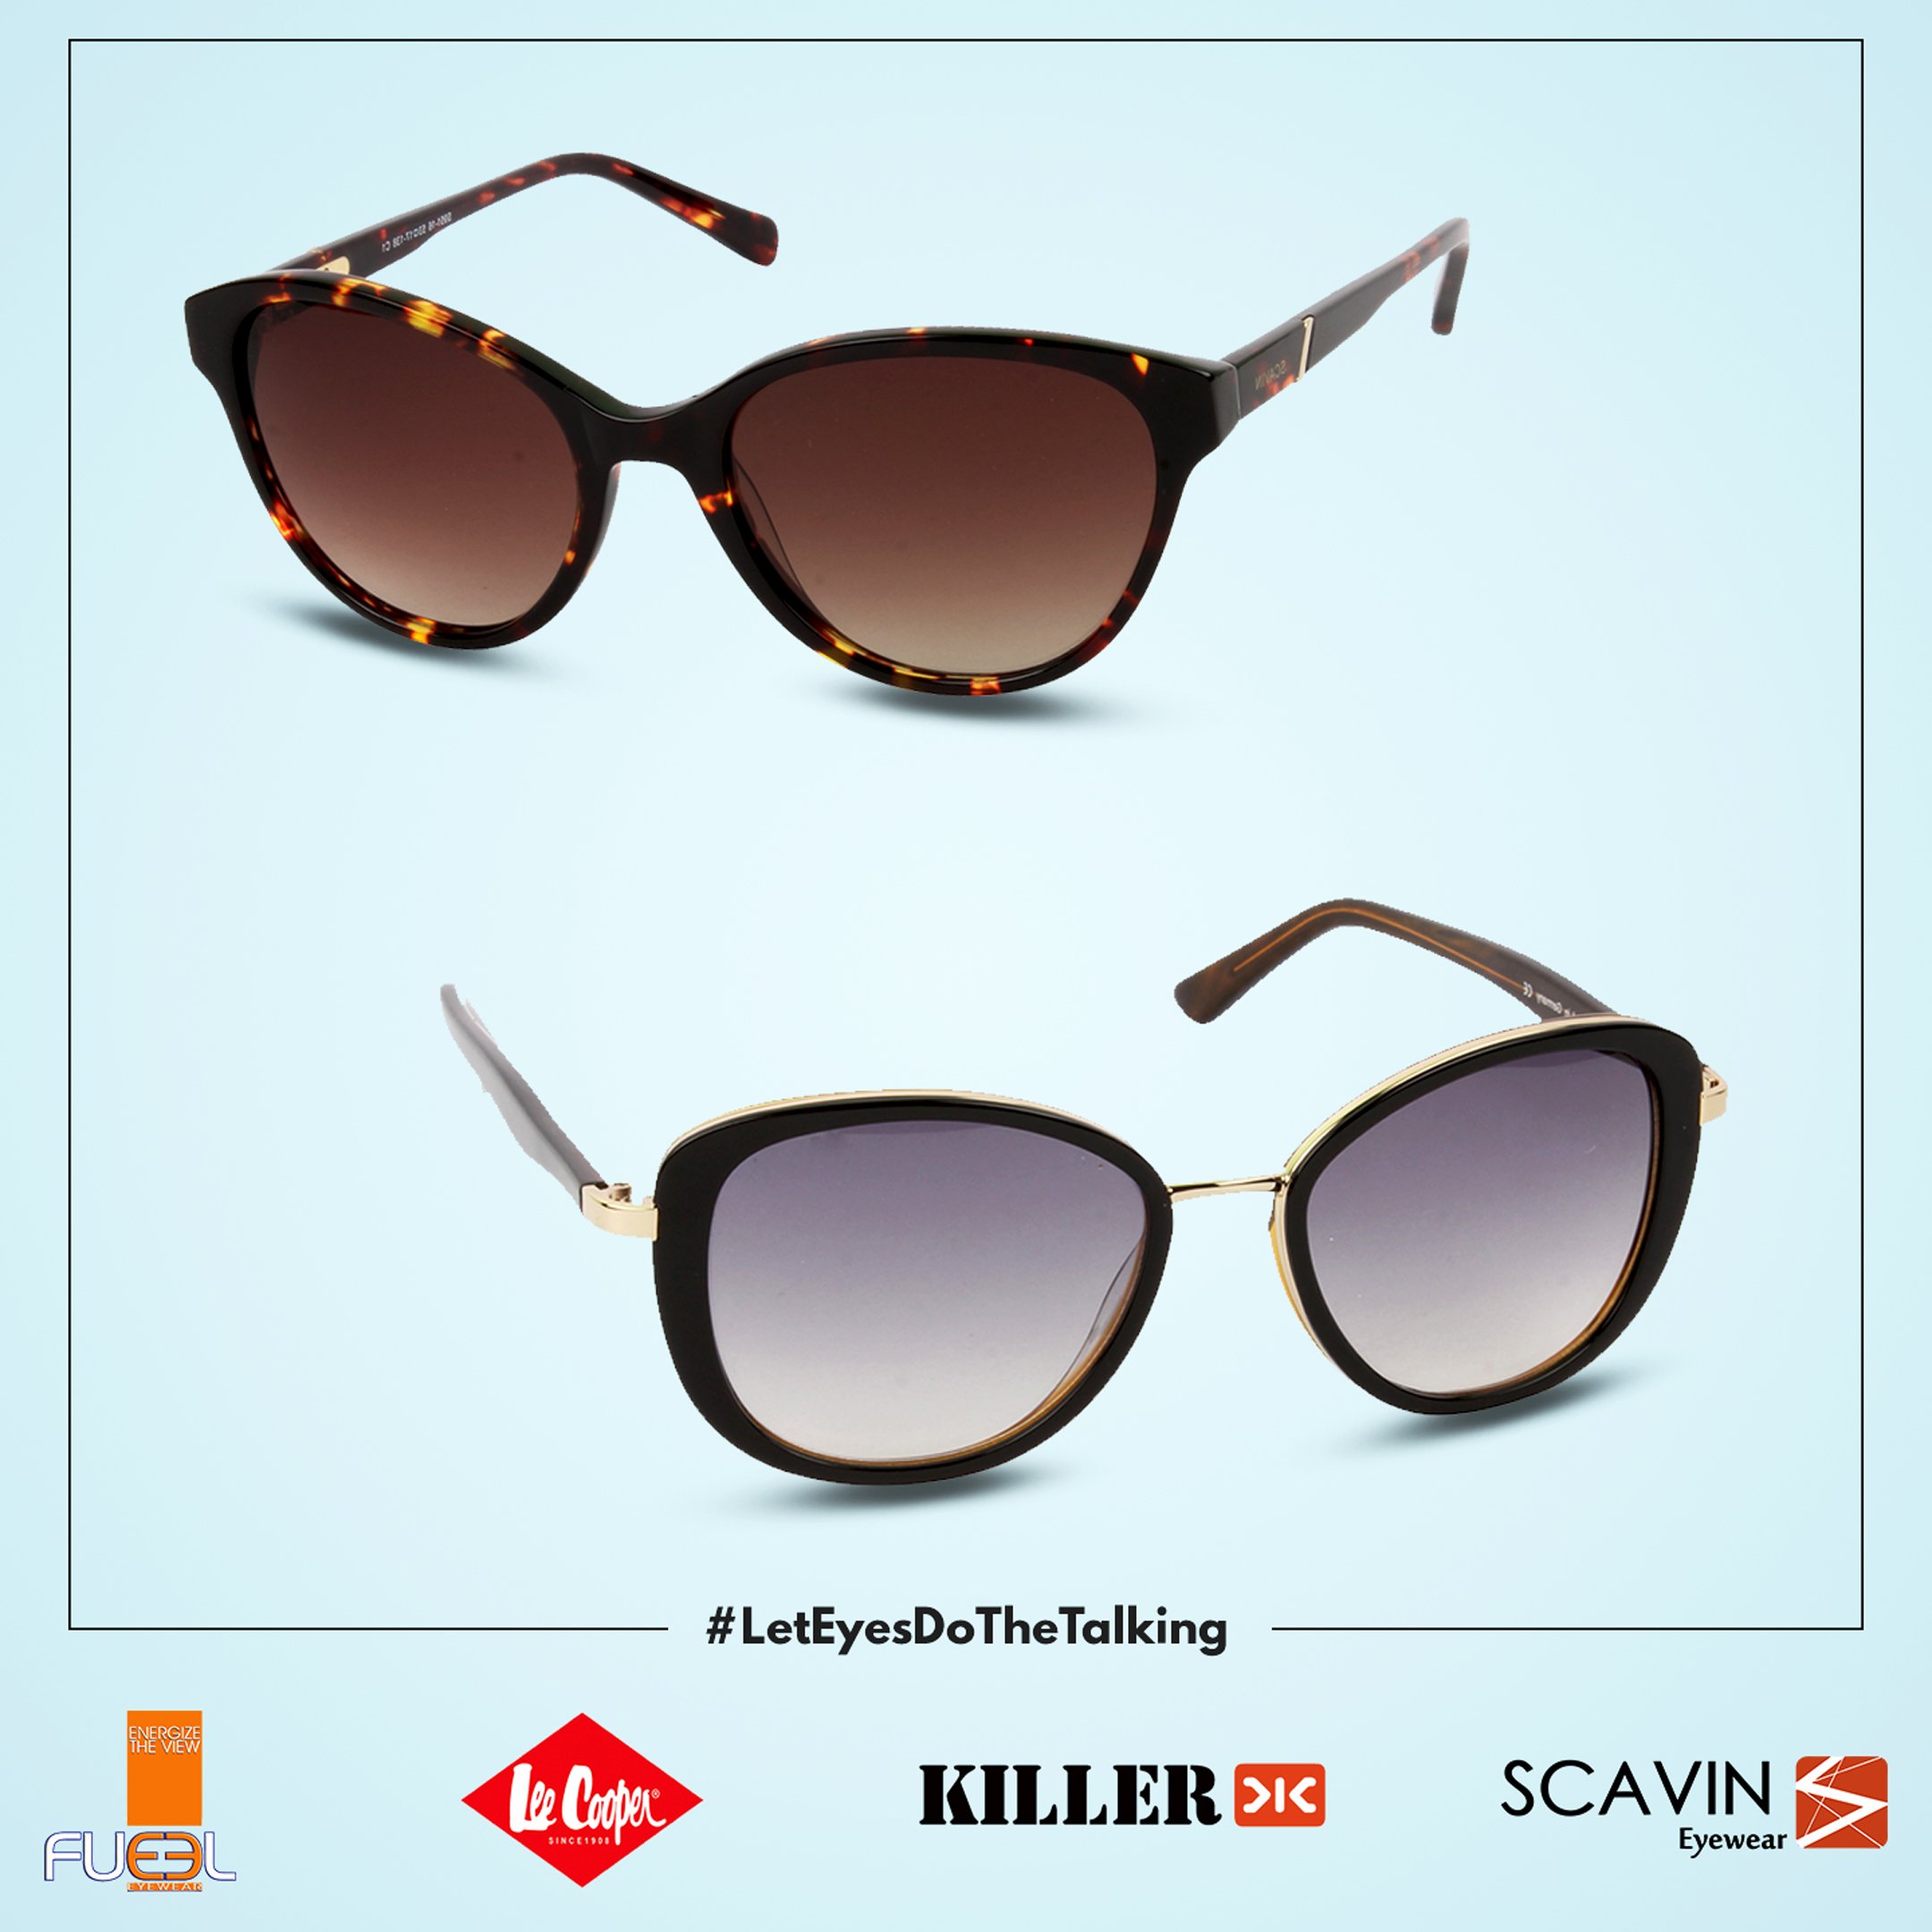 Scavin International Twitter: Online! Lee Cooper, fuel, x brands and other designs available! Pick your choice at https://t.co/y8mbbKmvFg #Scavin #Eyewear https://t.co/nKF1GVyPJn" / Twitter